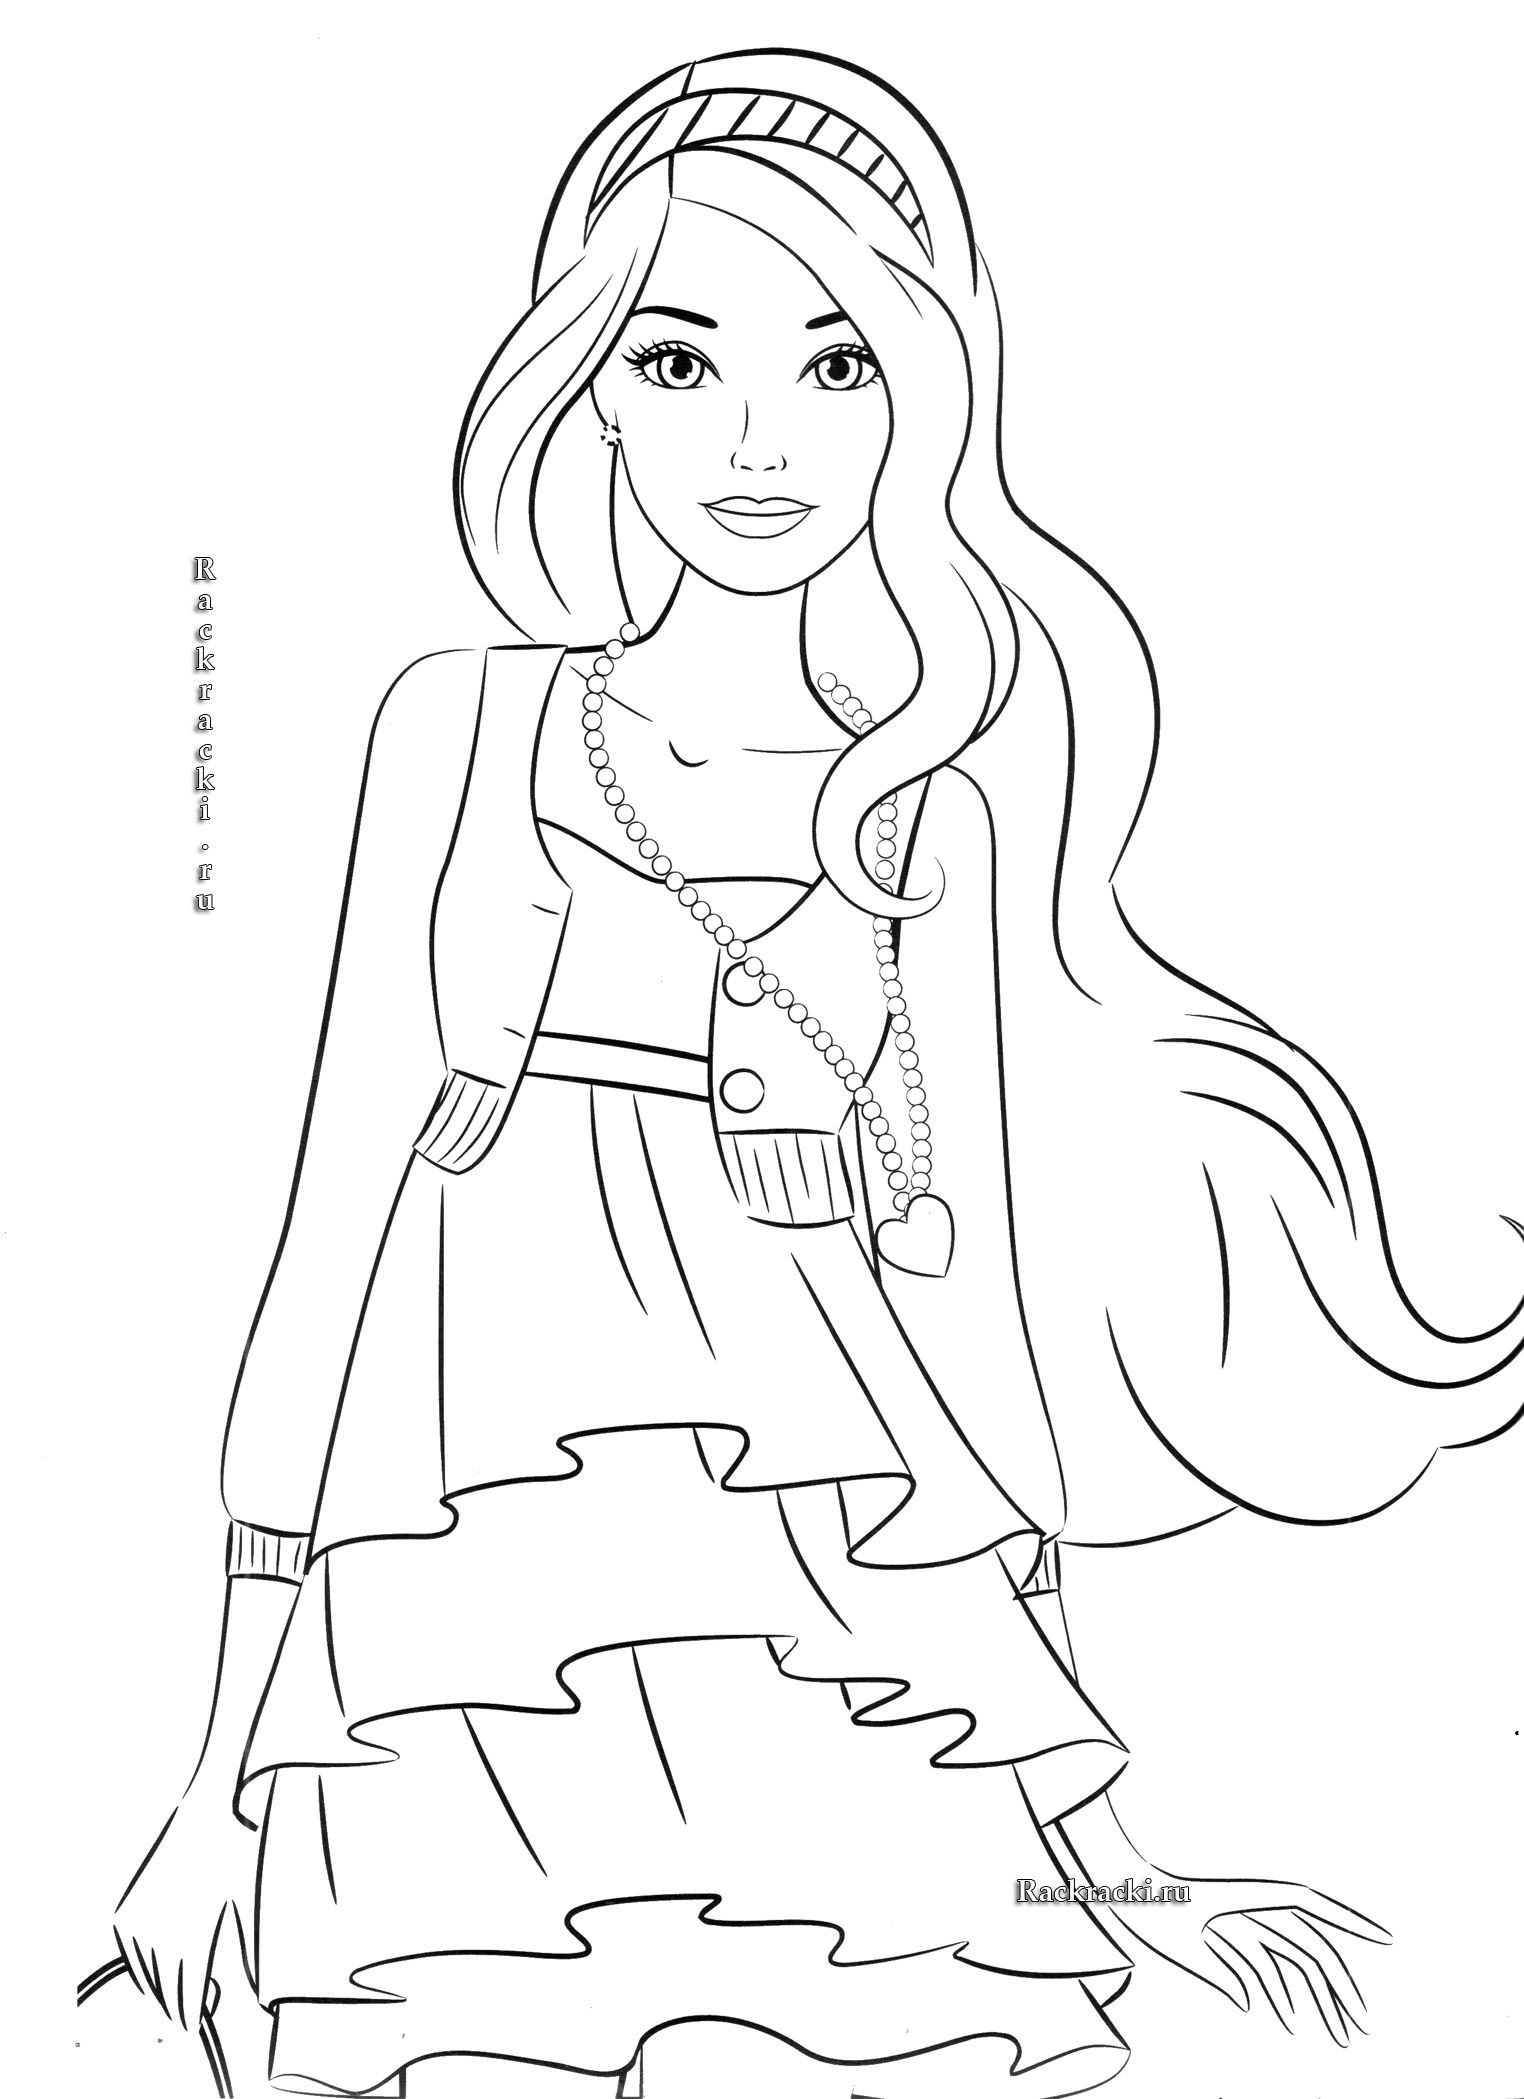 The Best Ideas for Barbie Coloring Pages for Girls - Home, Family ...